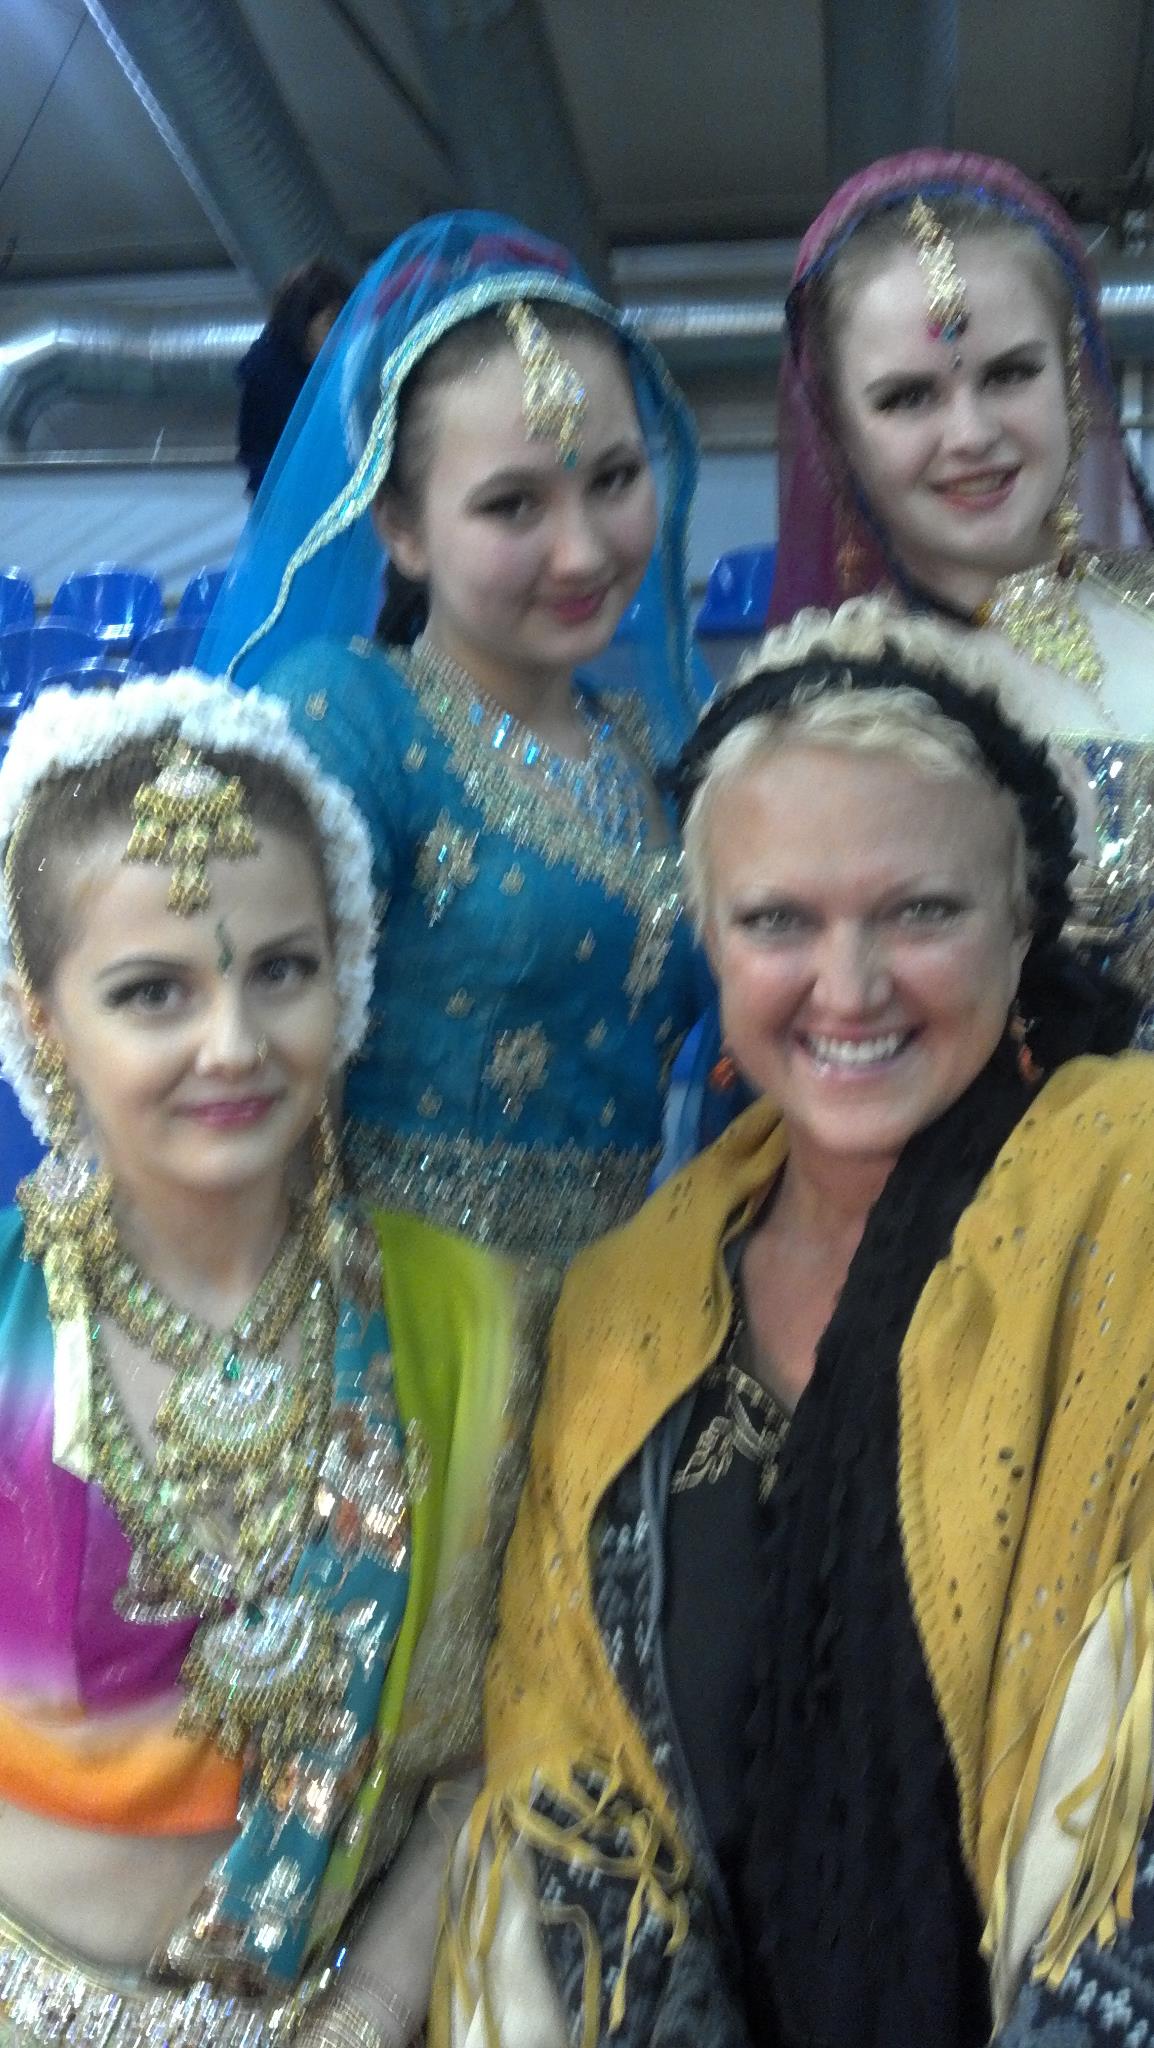 Dr. Kaye with dancer's in Russia.